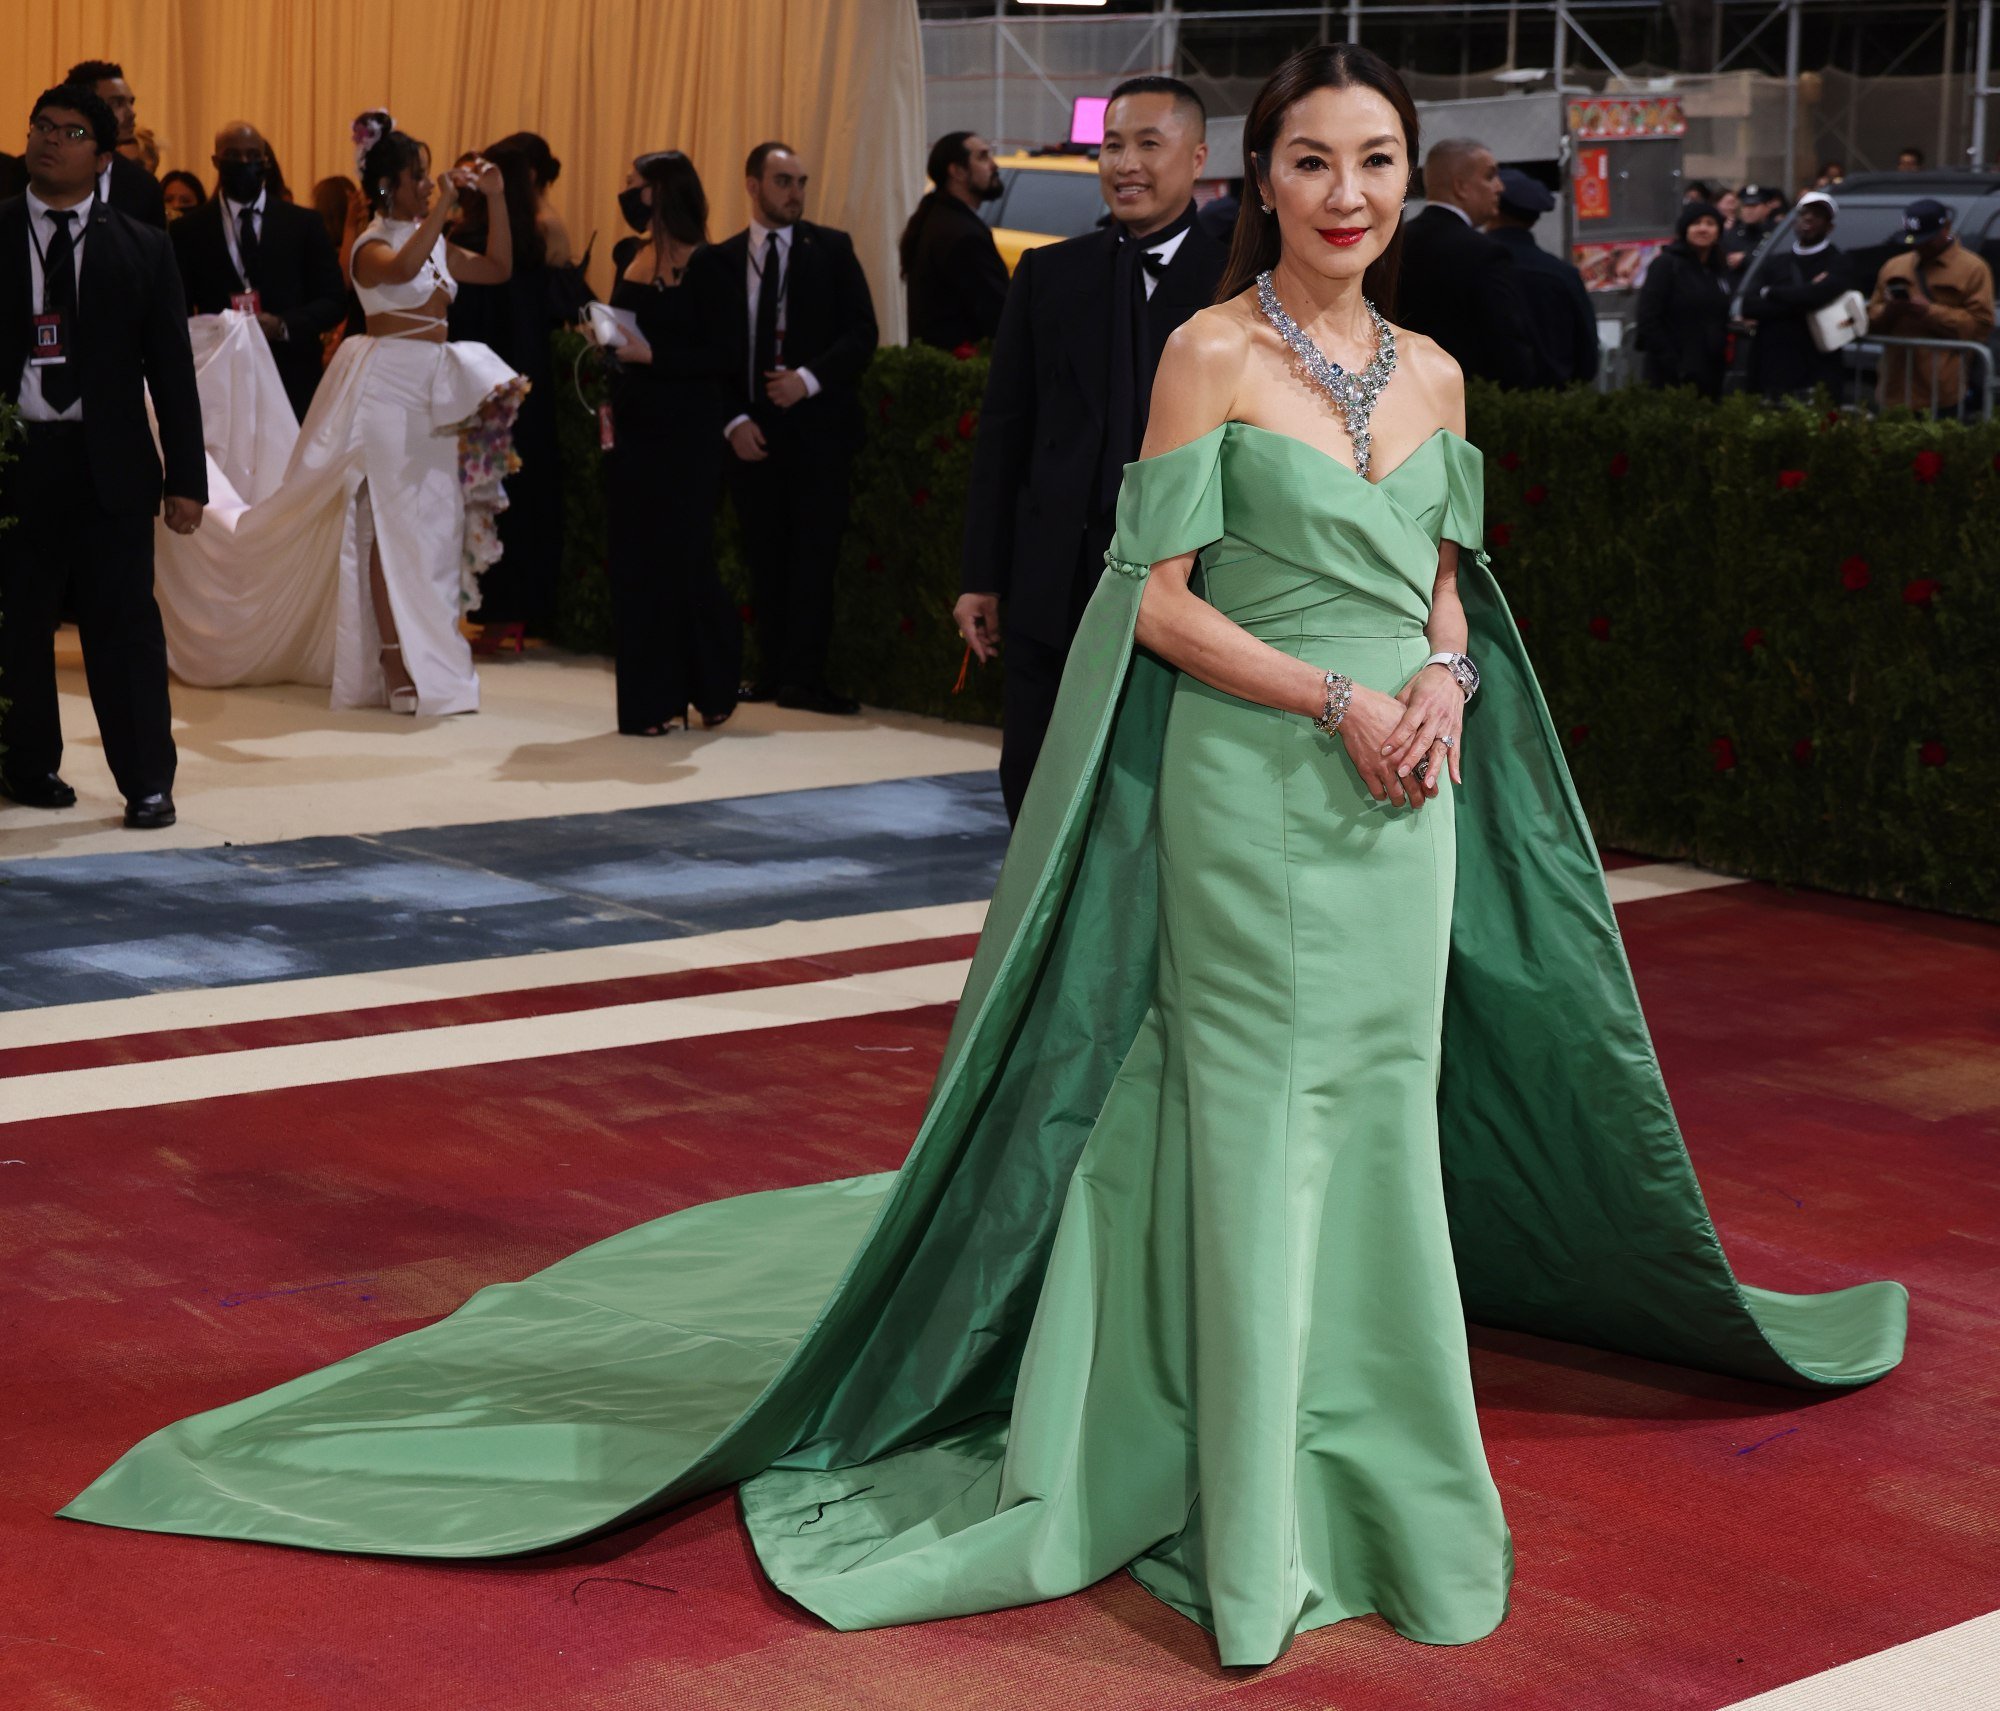 Crouching Tiger, Hidden Dragon’s Michelle Yeoh looked like a vision in emerald at the Met Gala 2022 on May 2, in New York, wearing the Forest Valley necklace from Tasaki. Photo: EPA-EFE